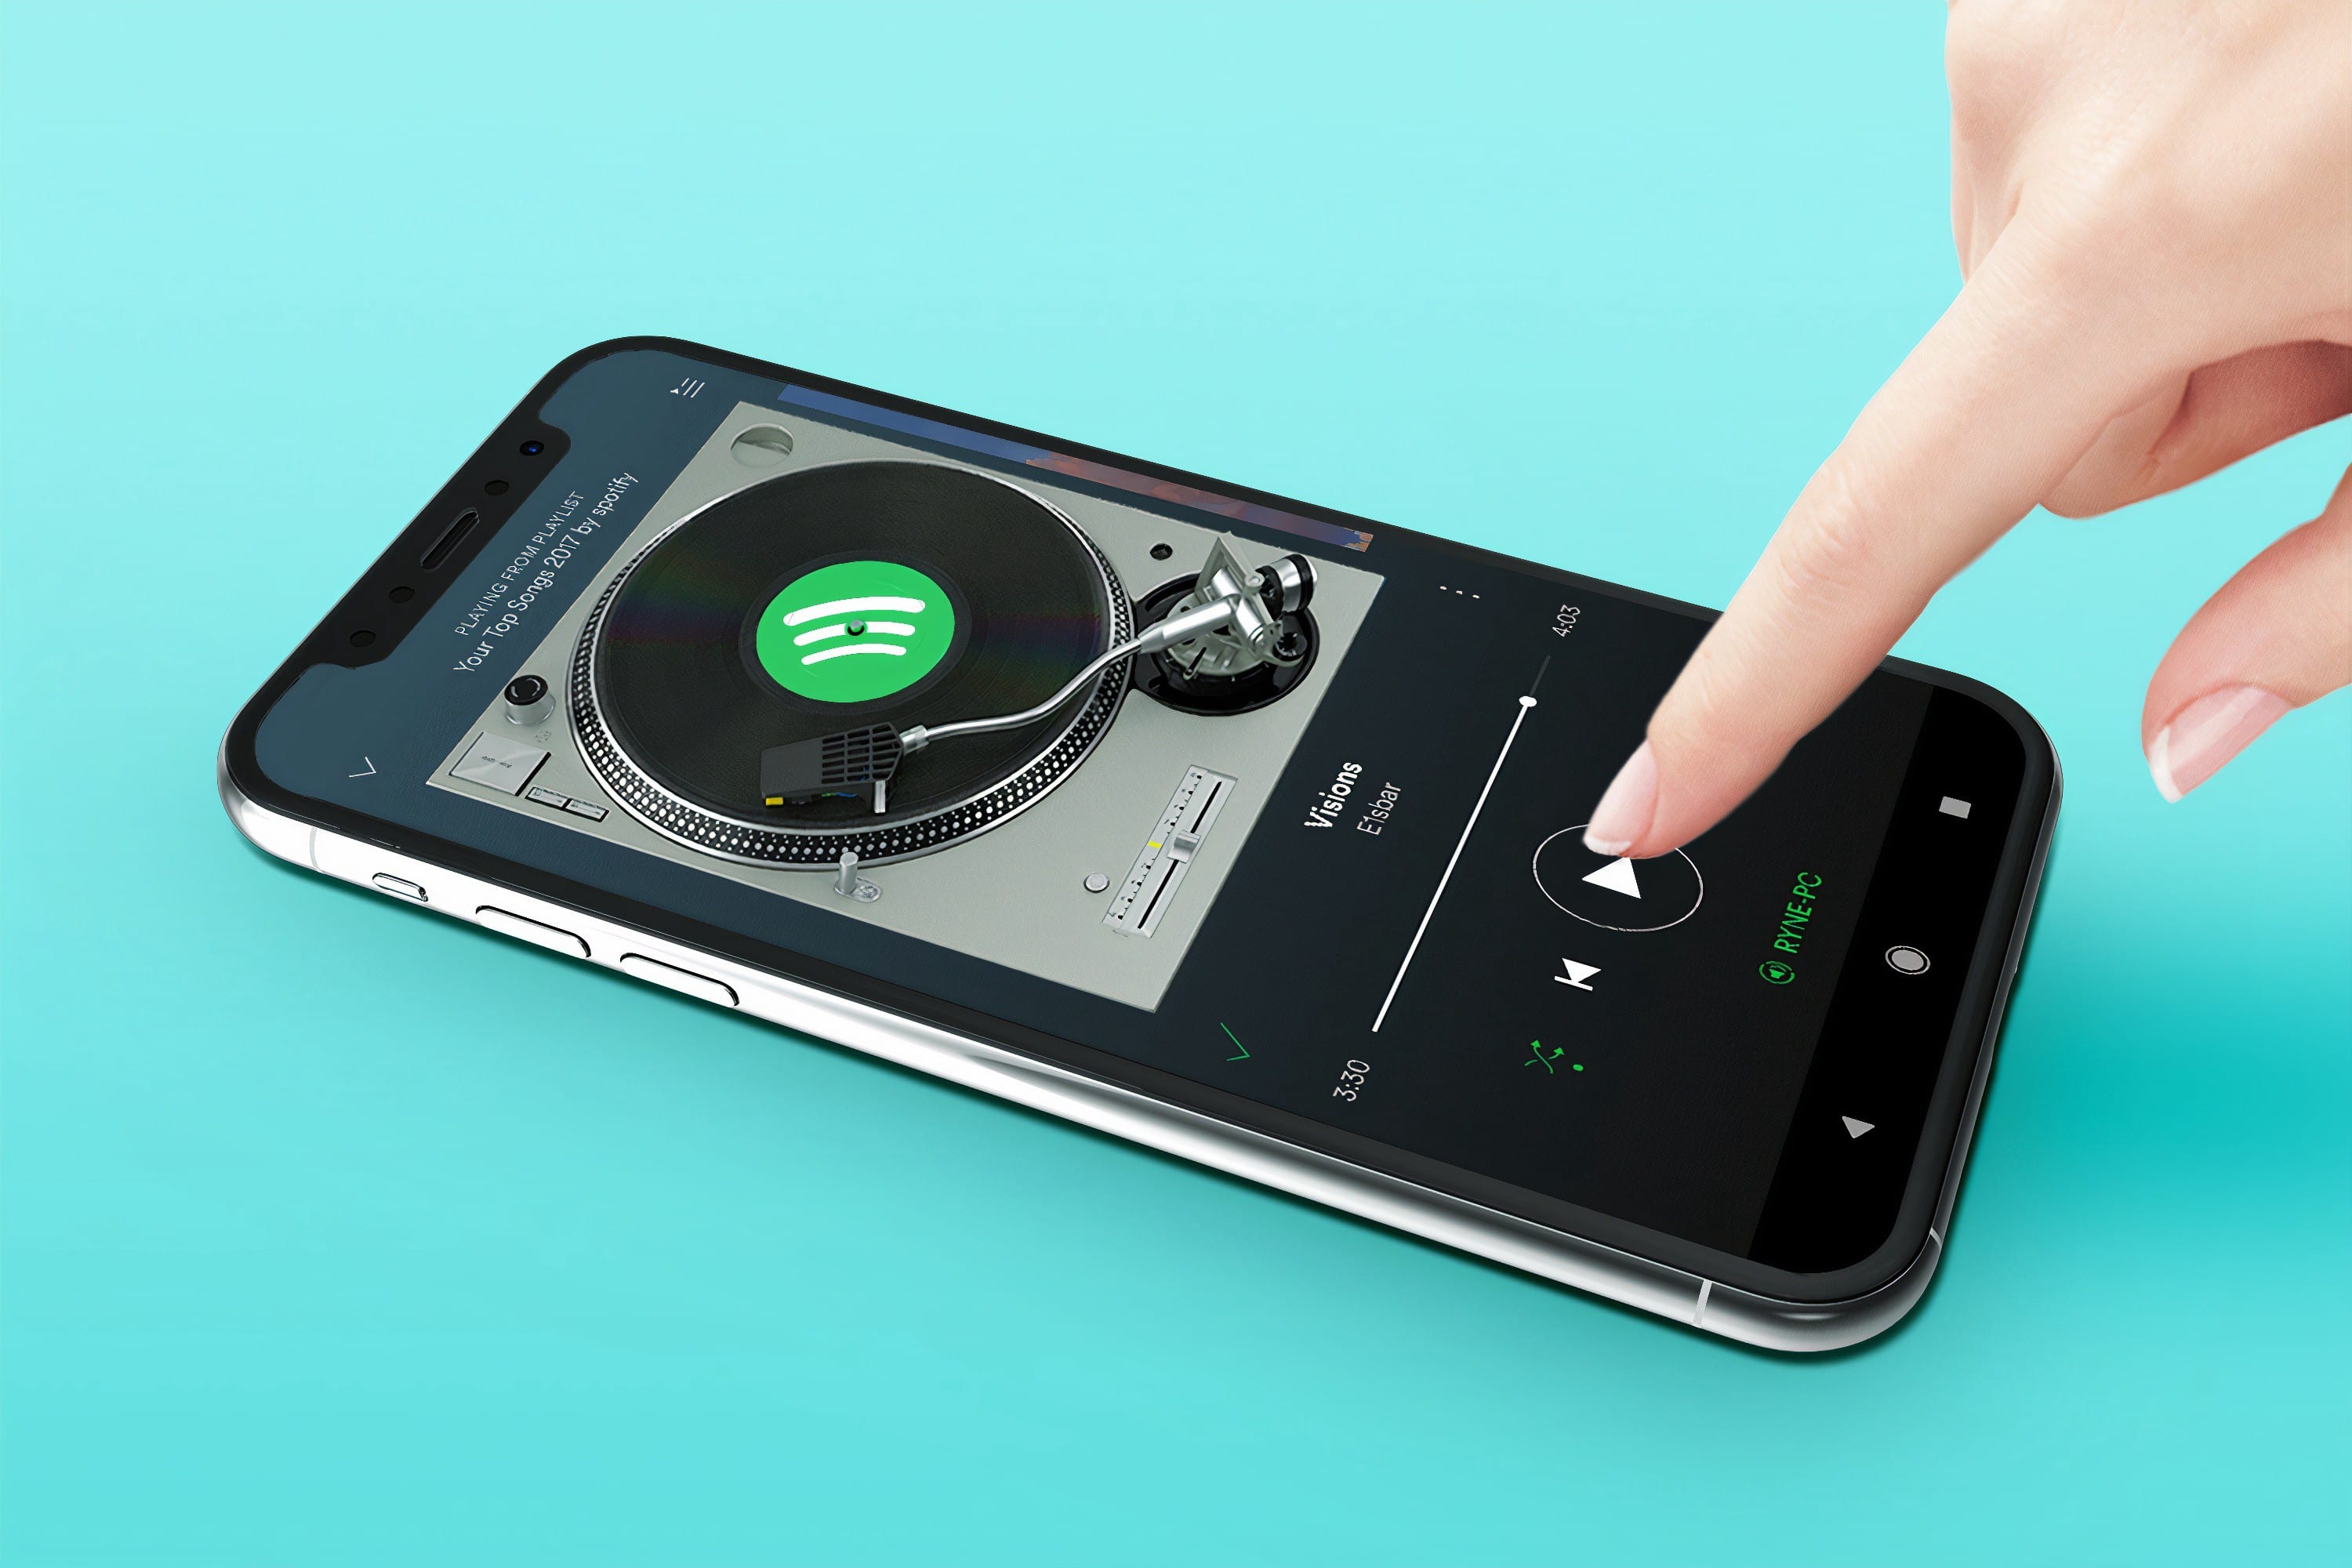 Spotify closes at an all-time high, pushes market capitalization to $60.8 bn